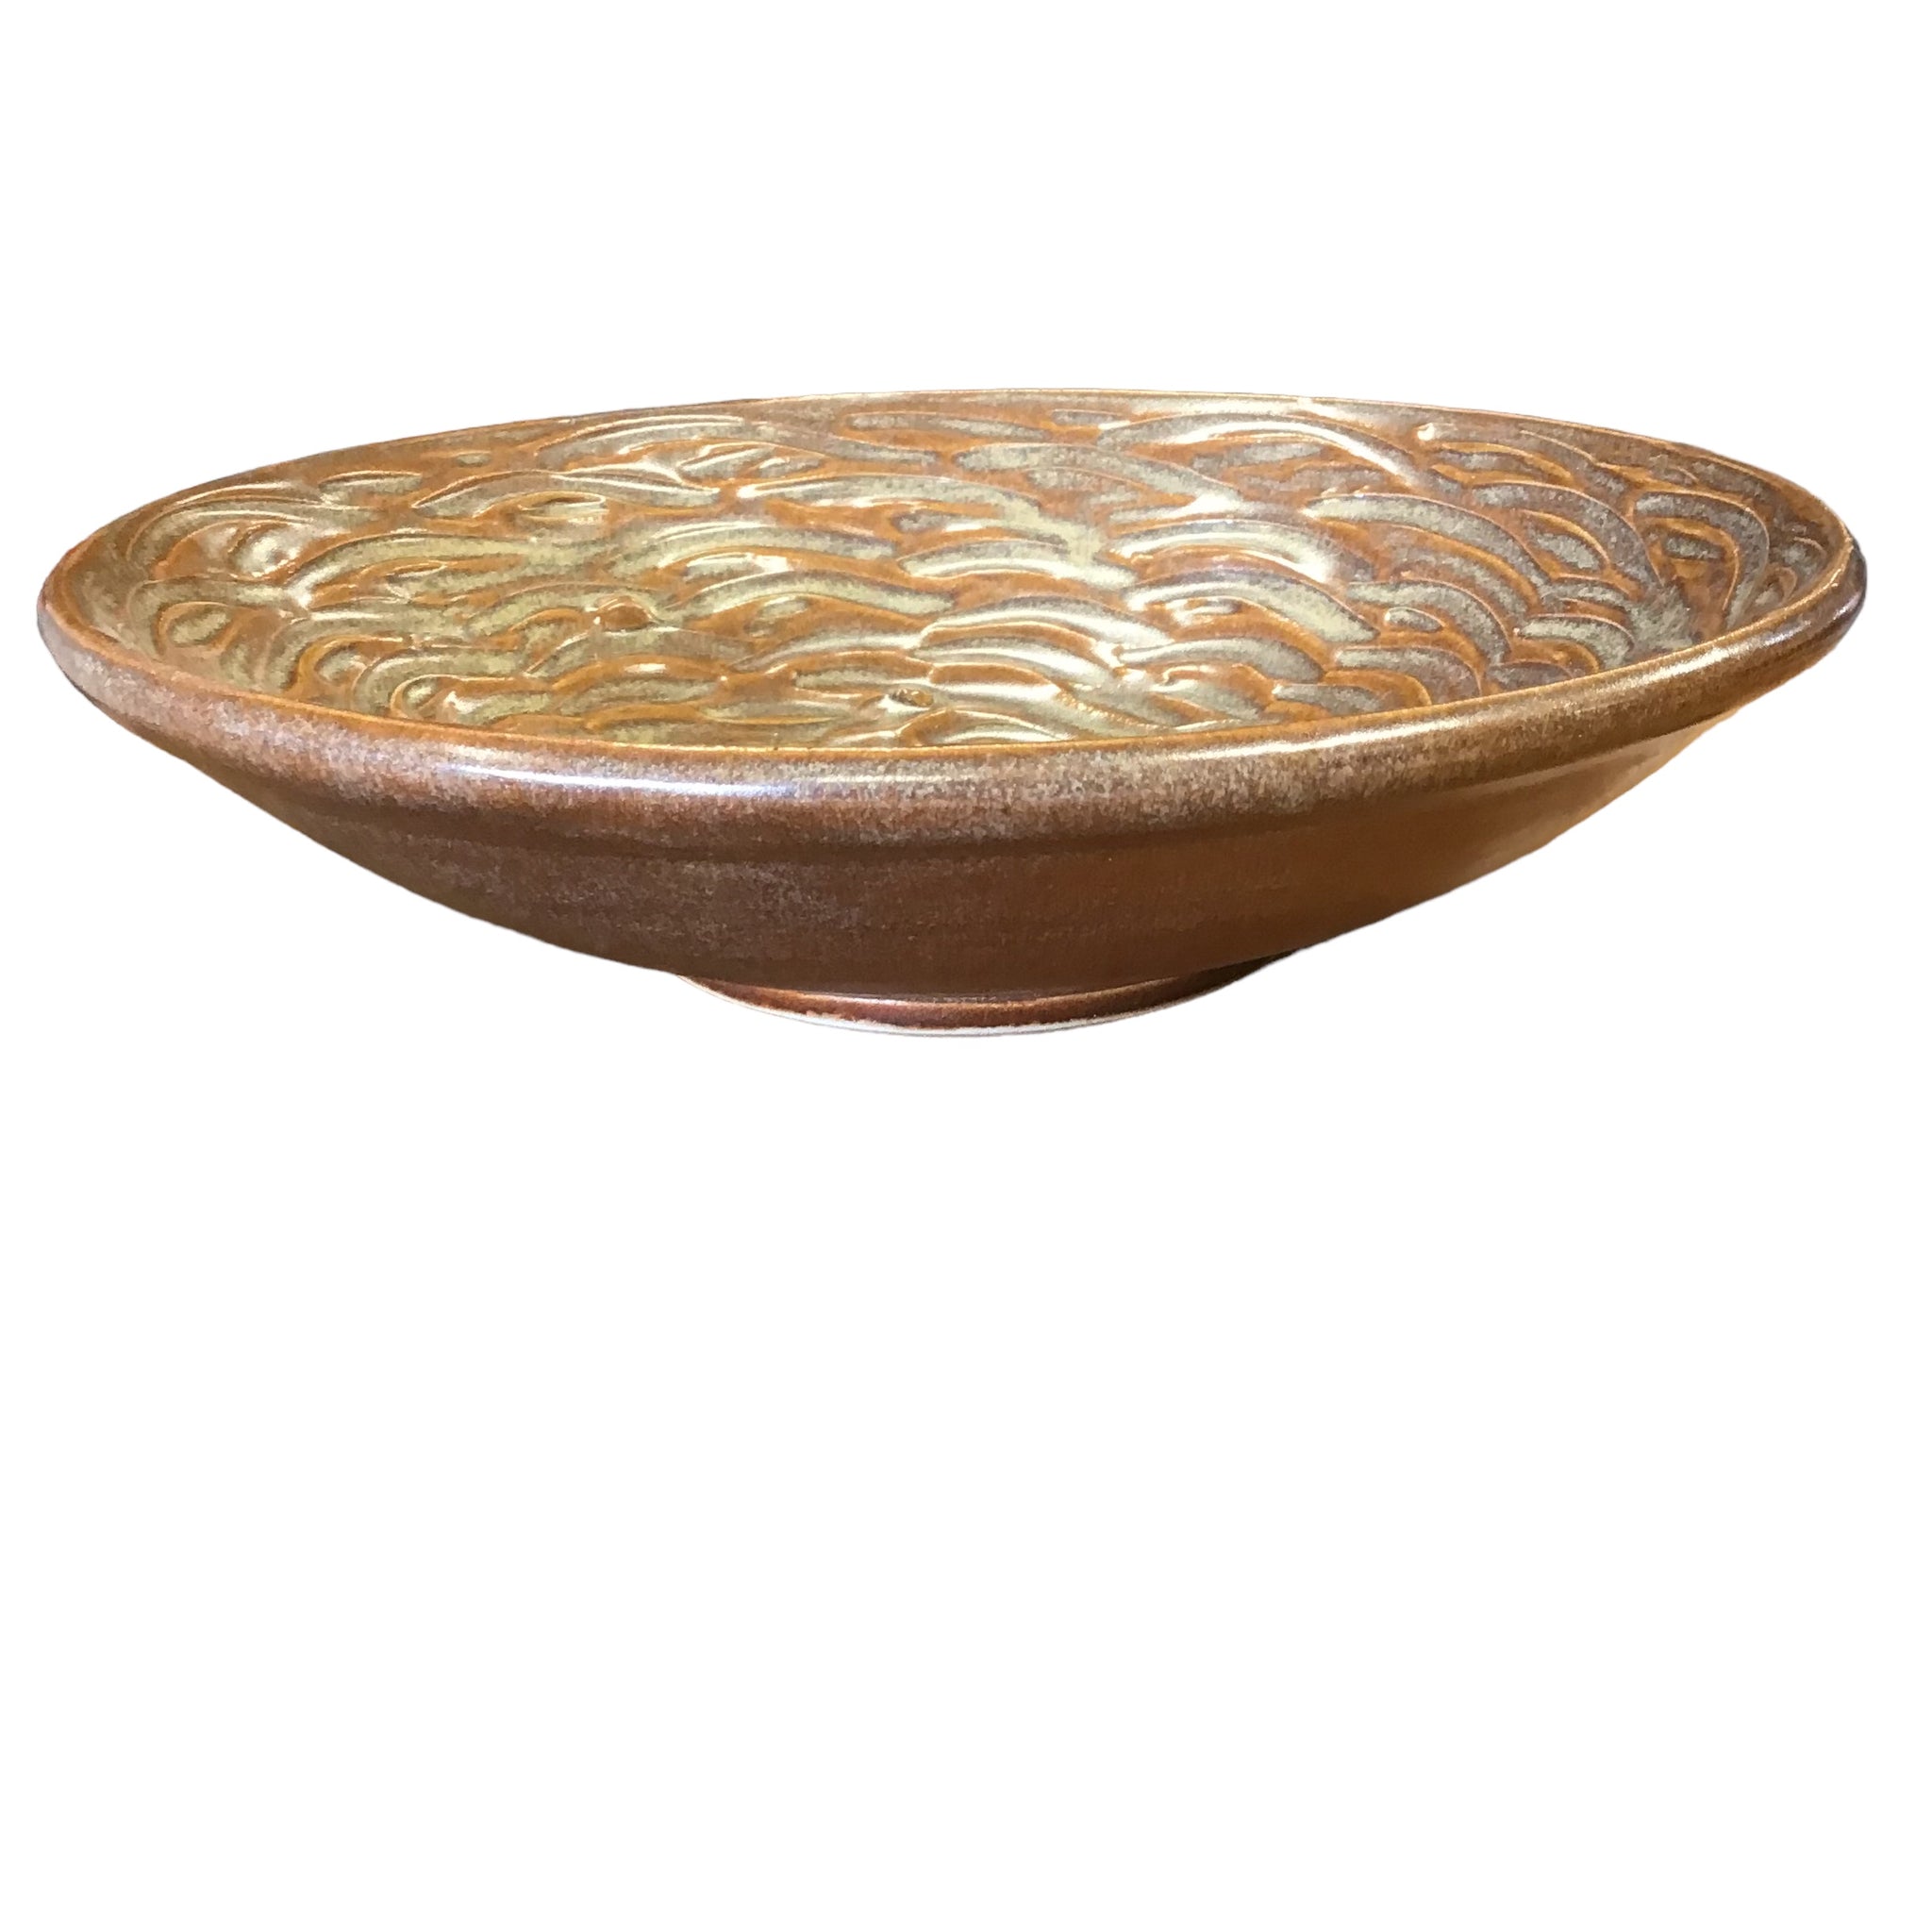 Pottery Bowl - brown with interior design